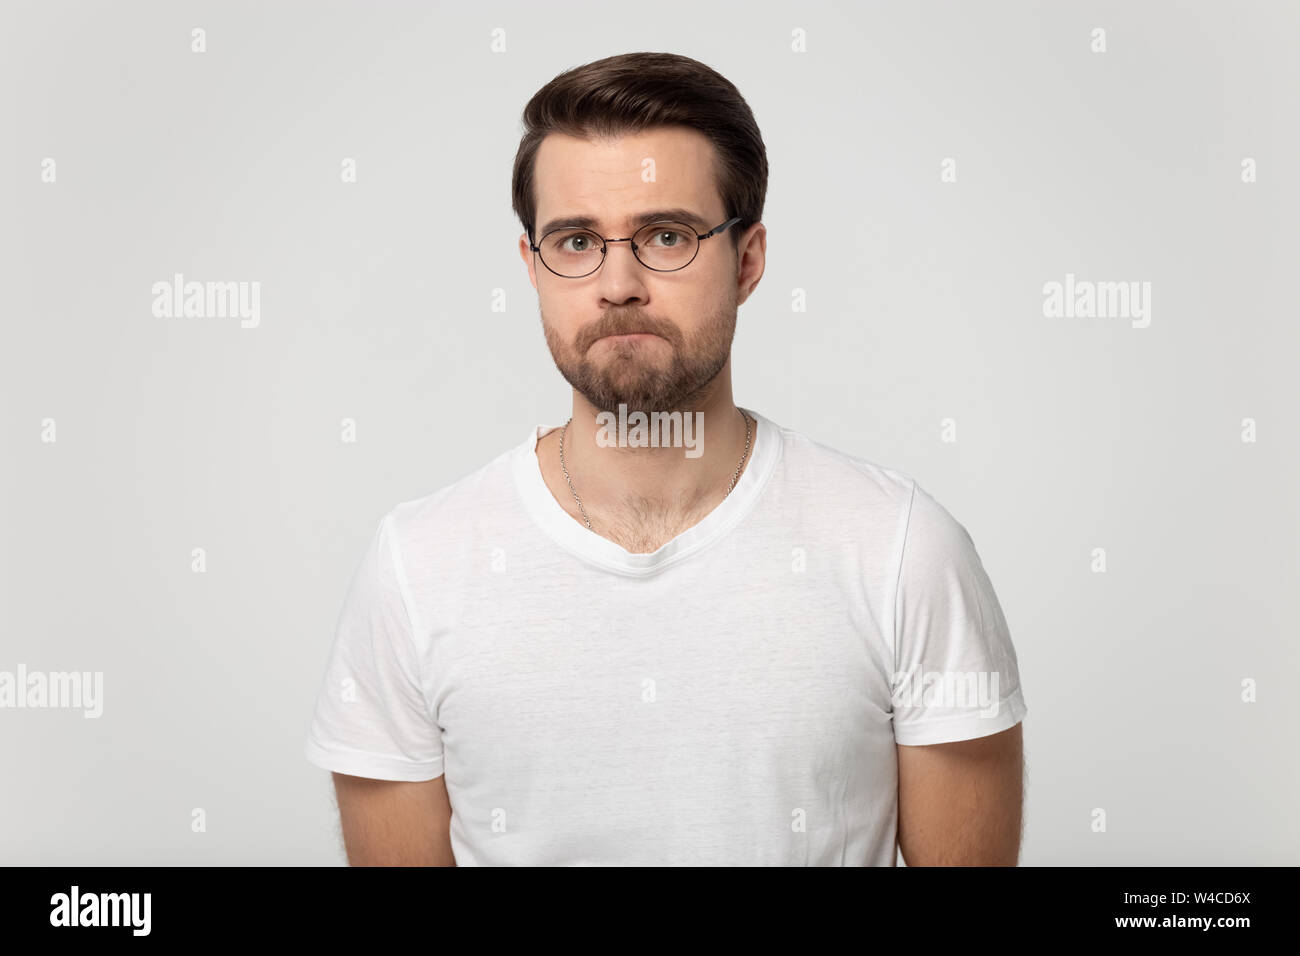 Upset guy with pursed lips posing isolated on gray background Stock Photo